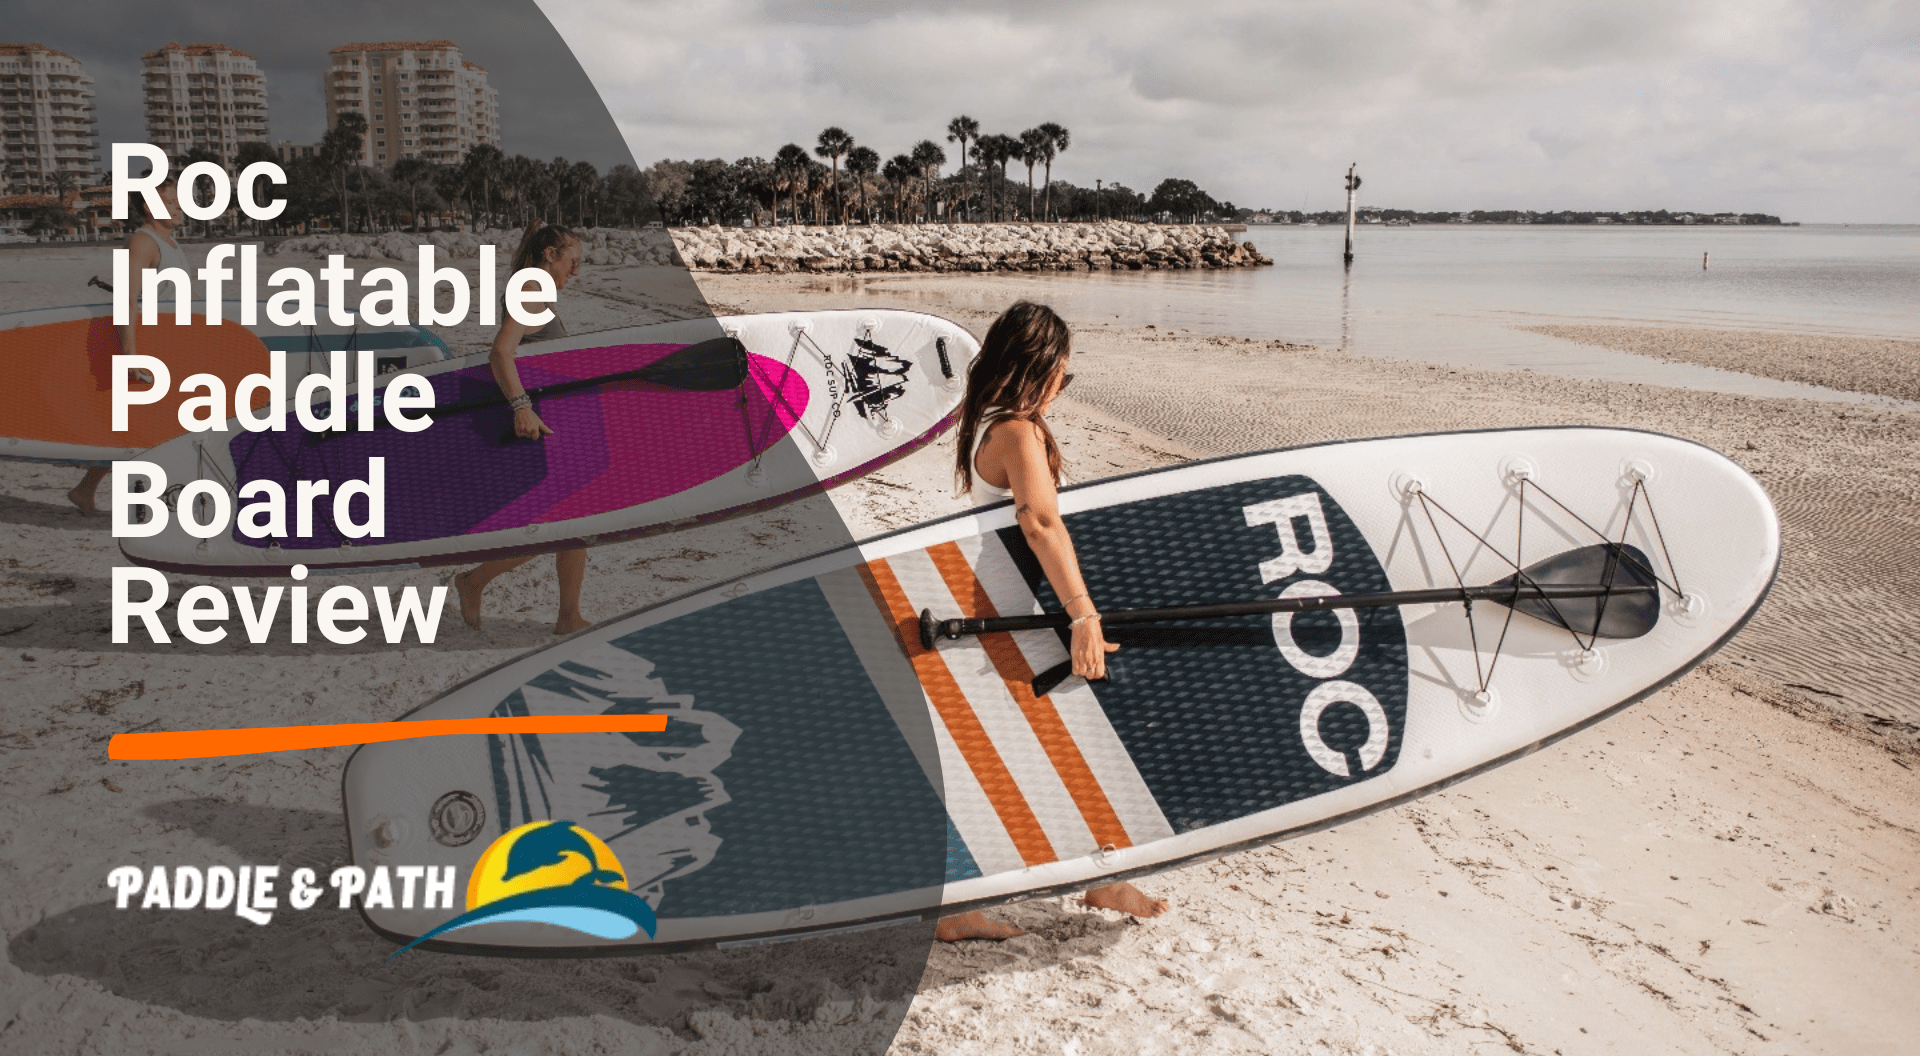 Roc Inflatable Paddle Board Review